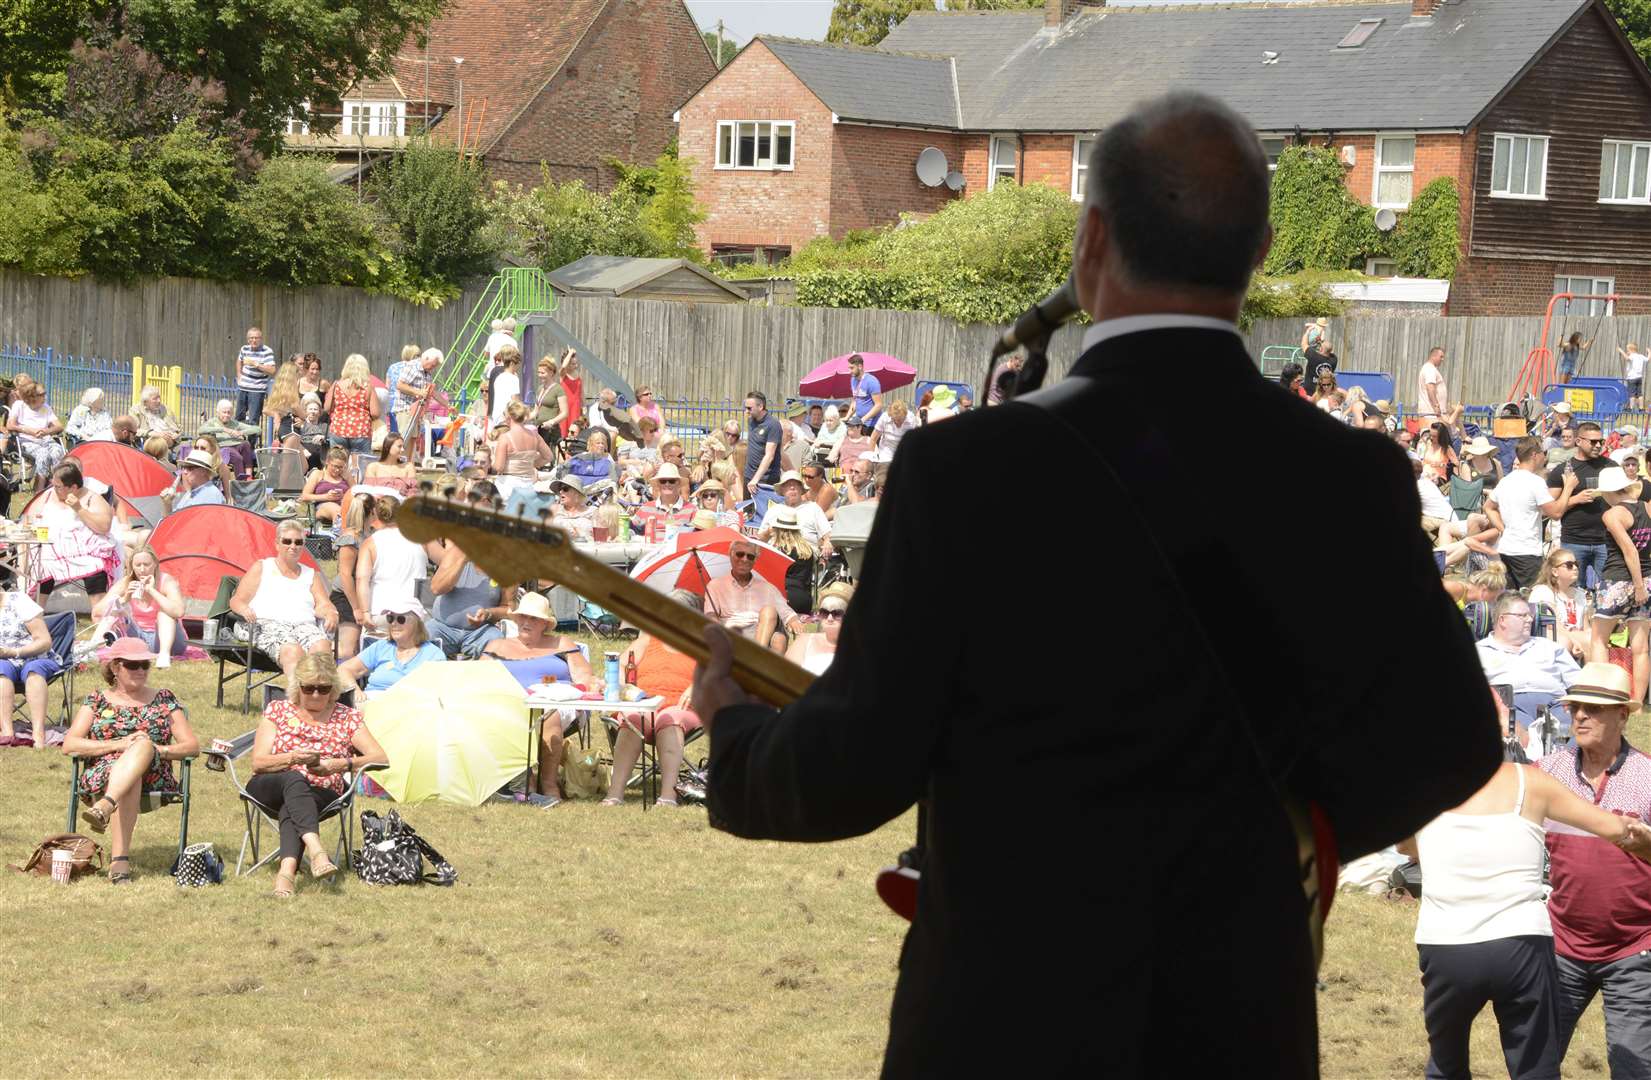 St Michaels Recreation Ground hosts the popular Tributes in the Park event